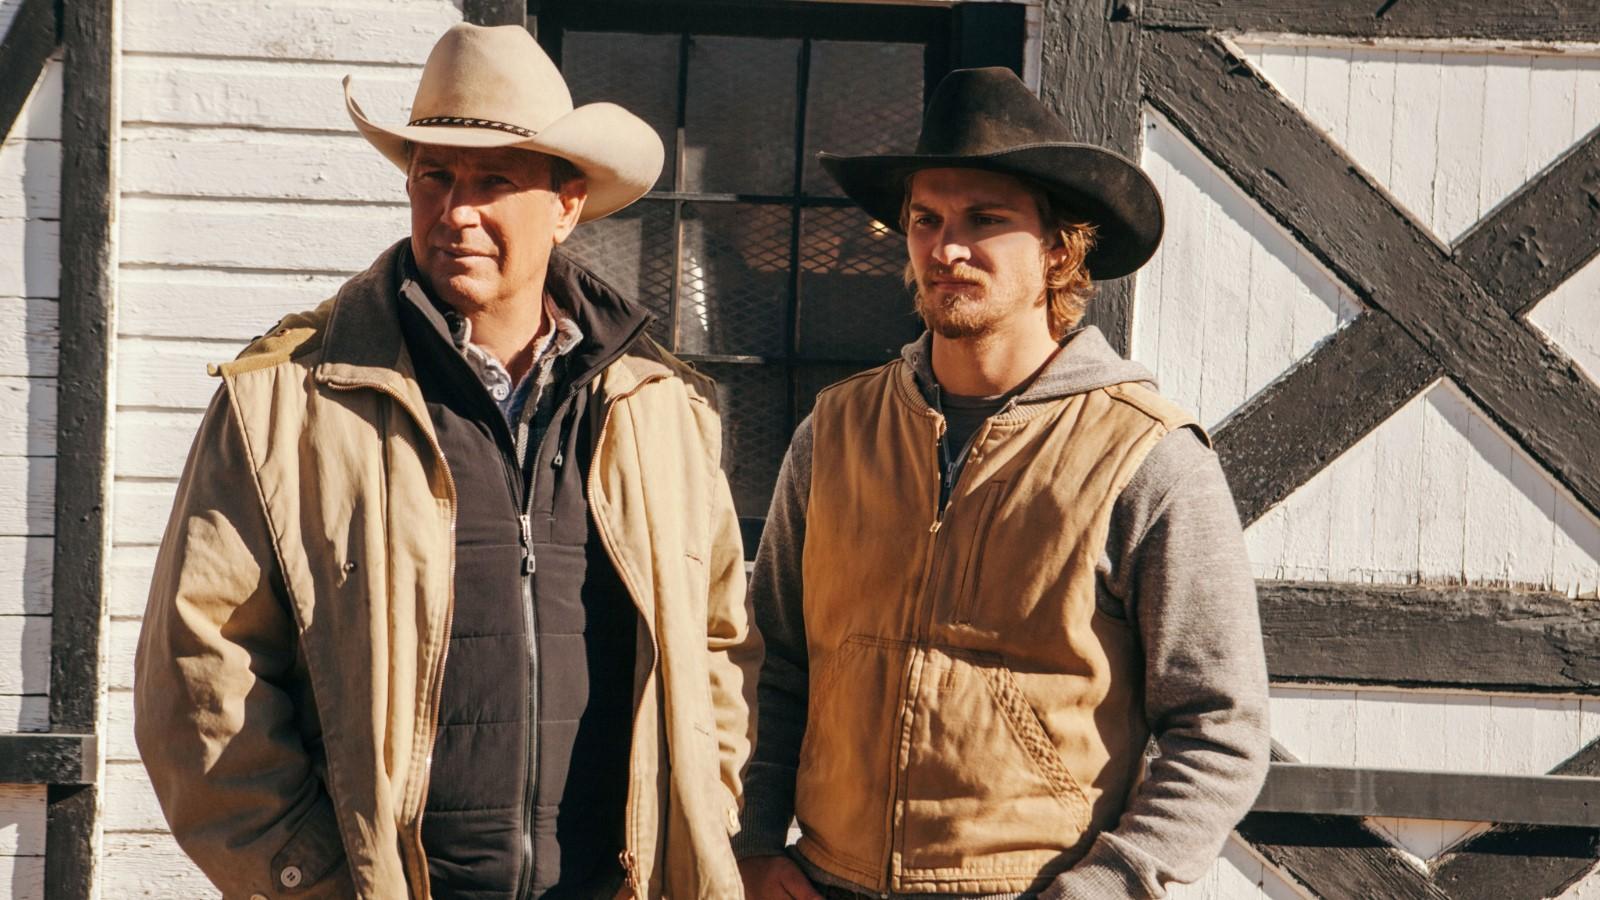 Kevin Costner and Luke Grimes as John and Kayce Dutton looking into the distance in Yellowstone